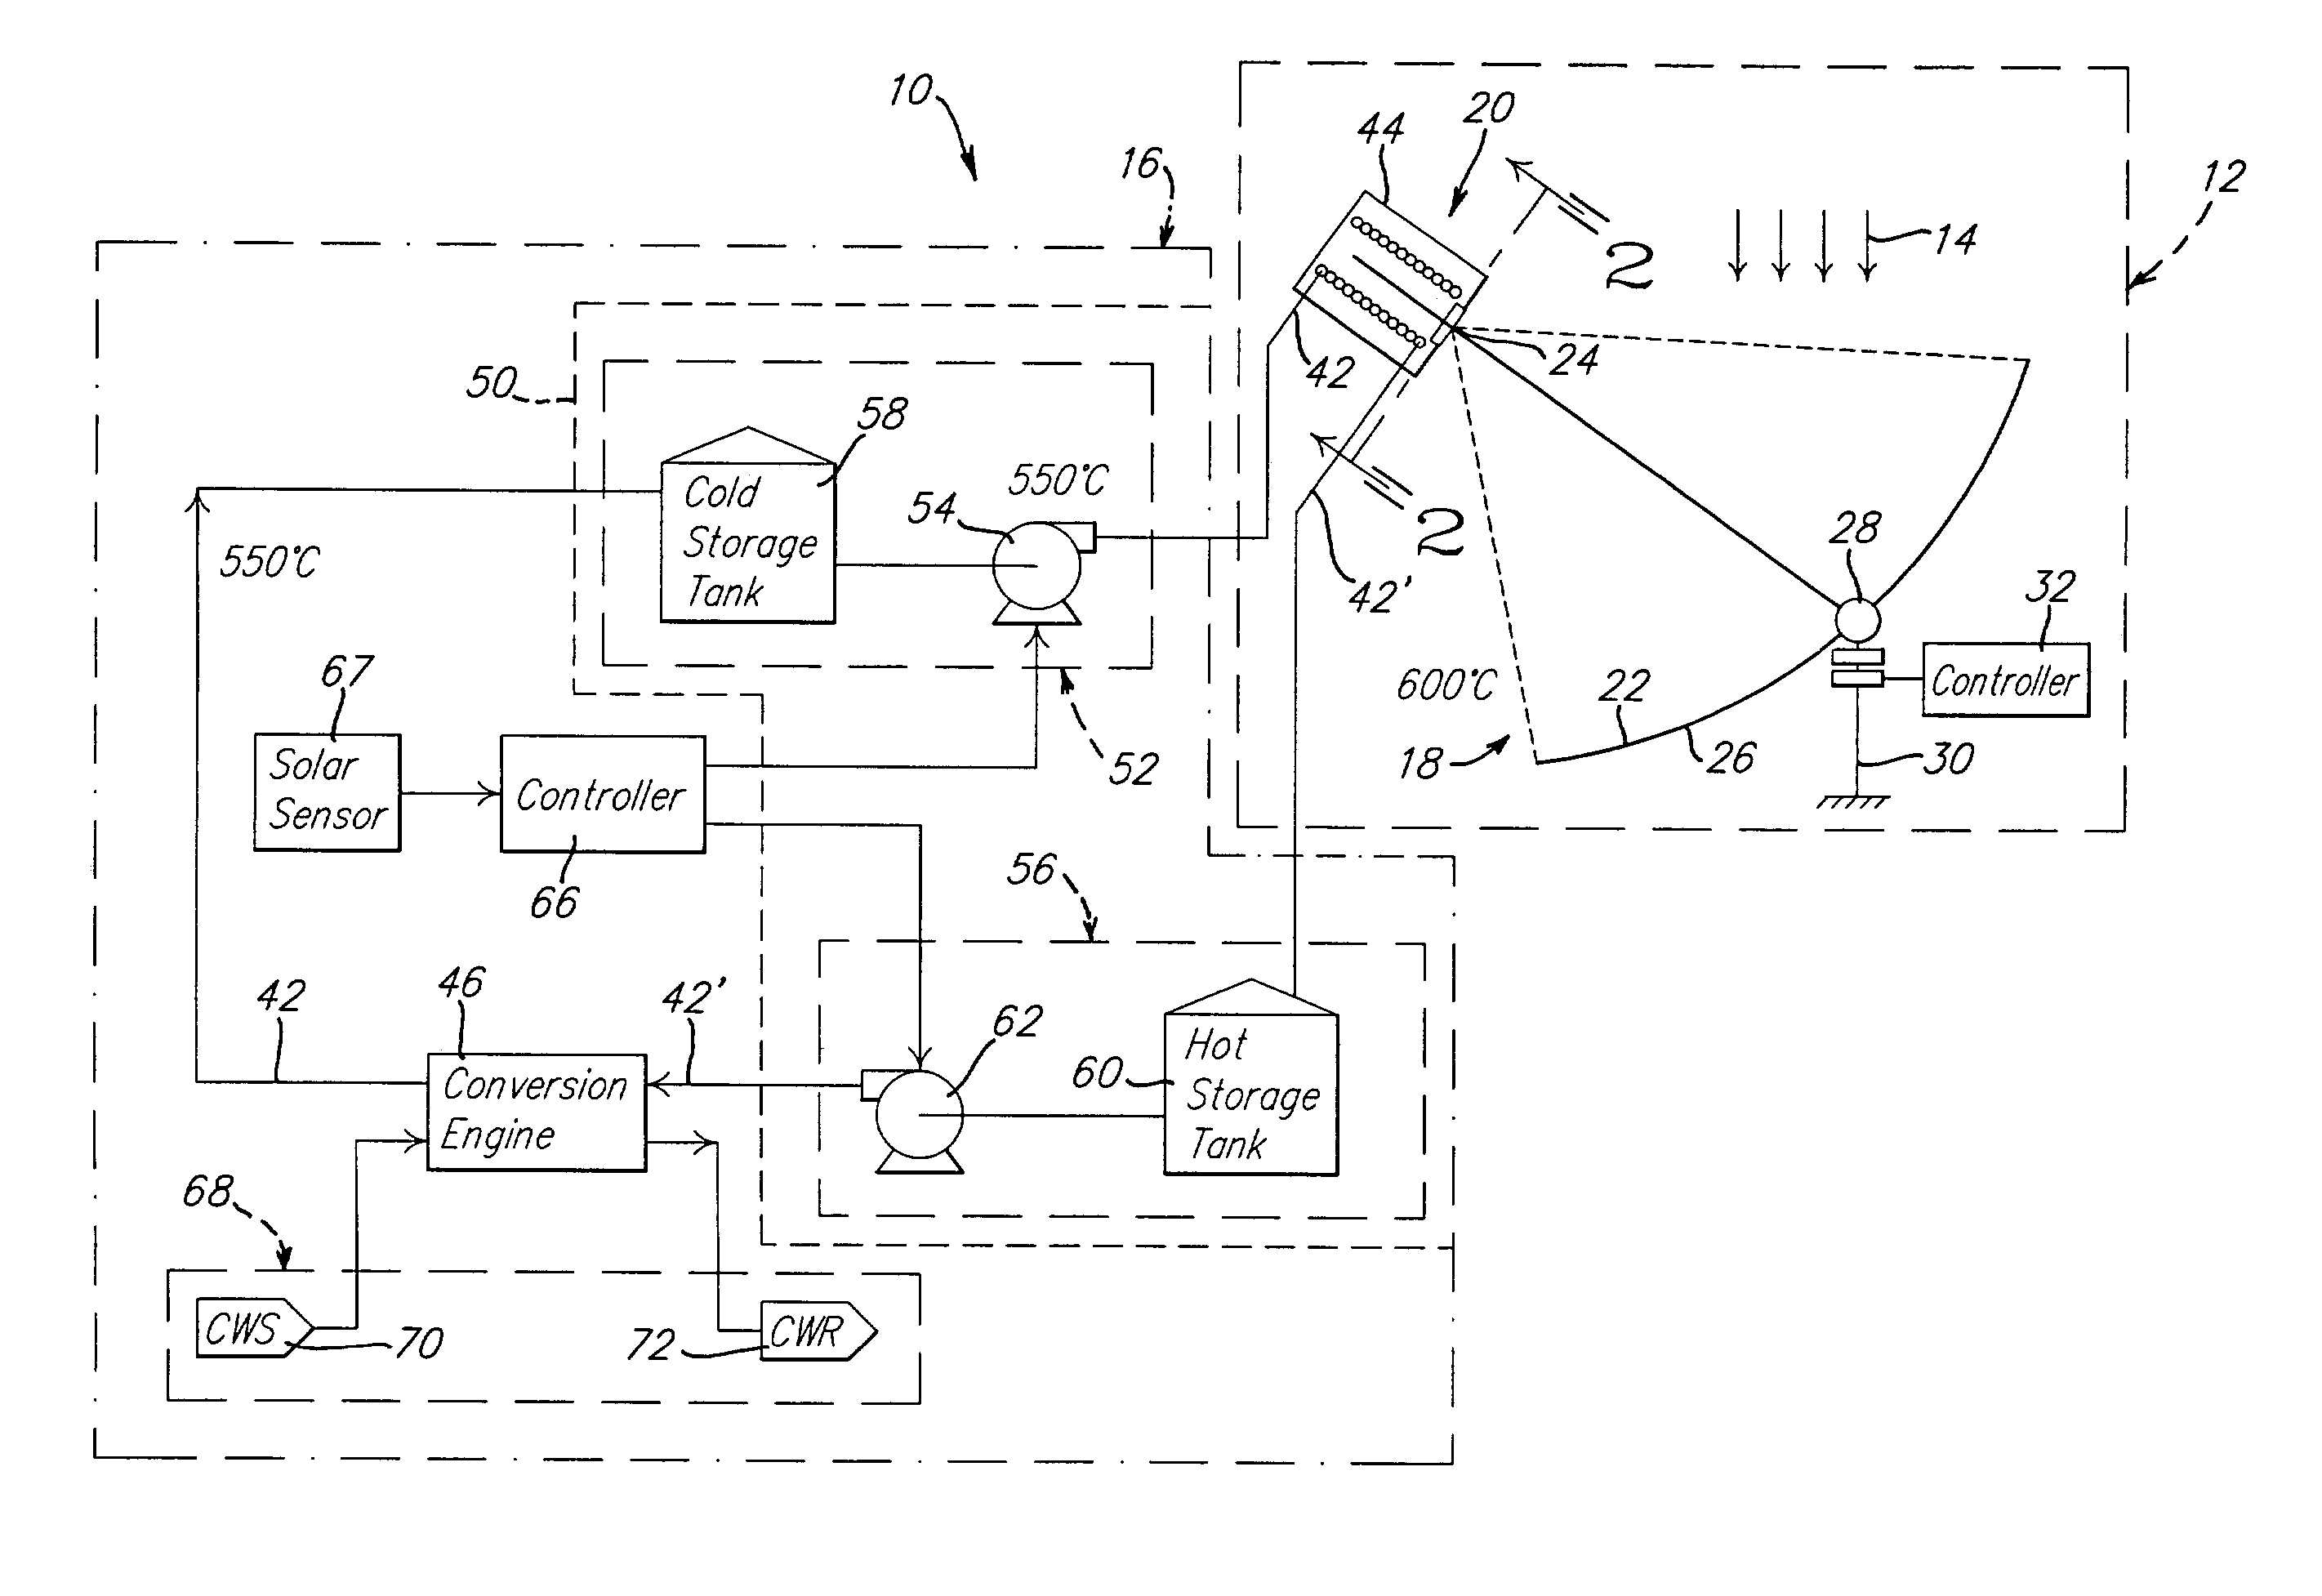 Solar dish concentrator with a molten salt receiver incorporating thermal energy storage